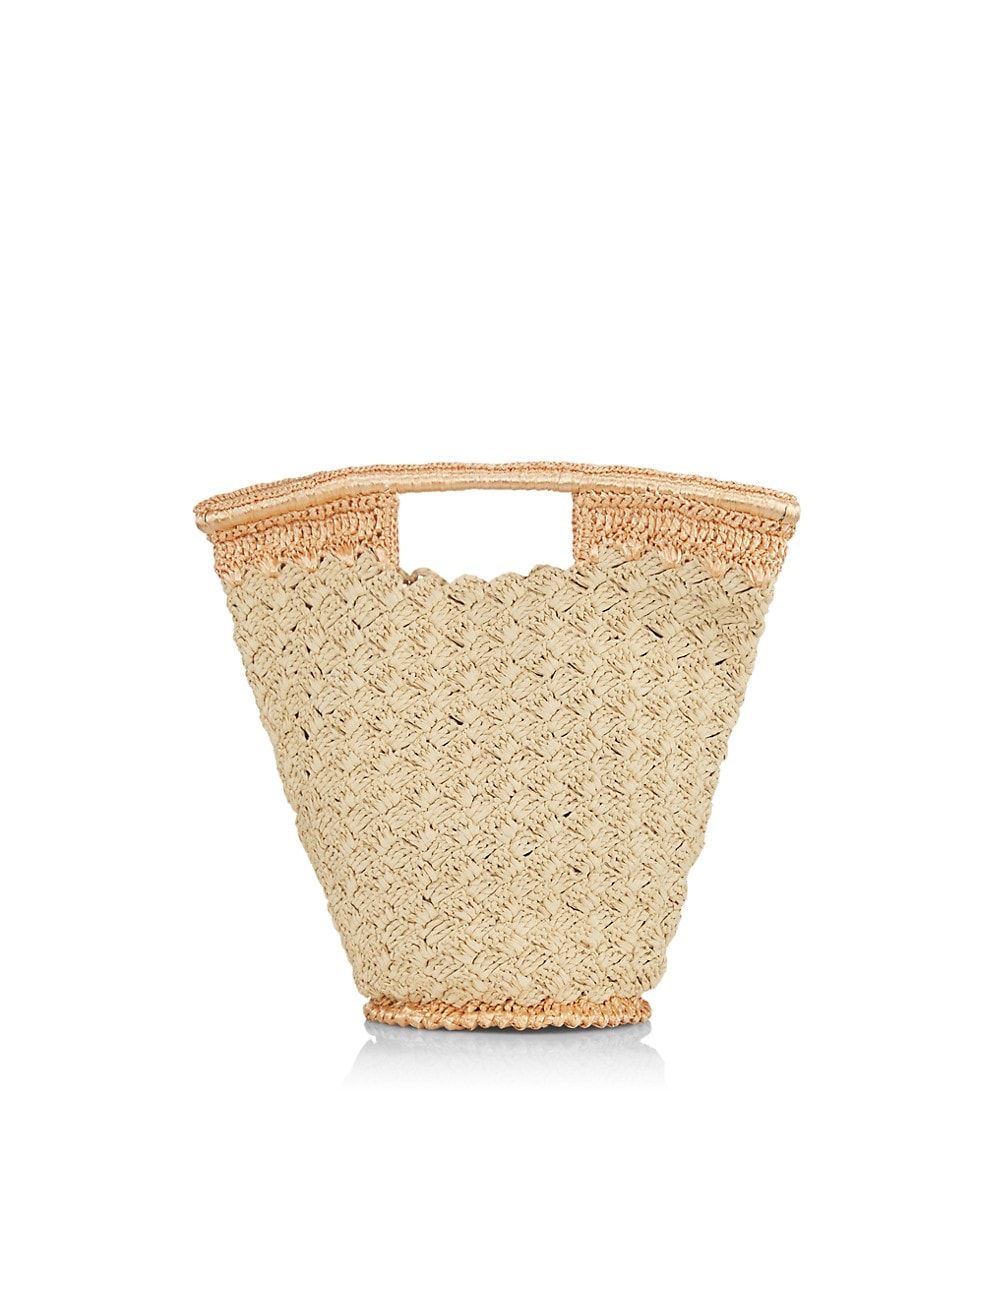 Carrie Forbes Lily Raffia Top Handle Bag | Saks Fifth Avenue